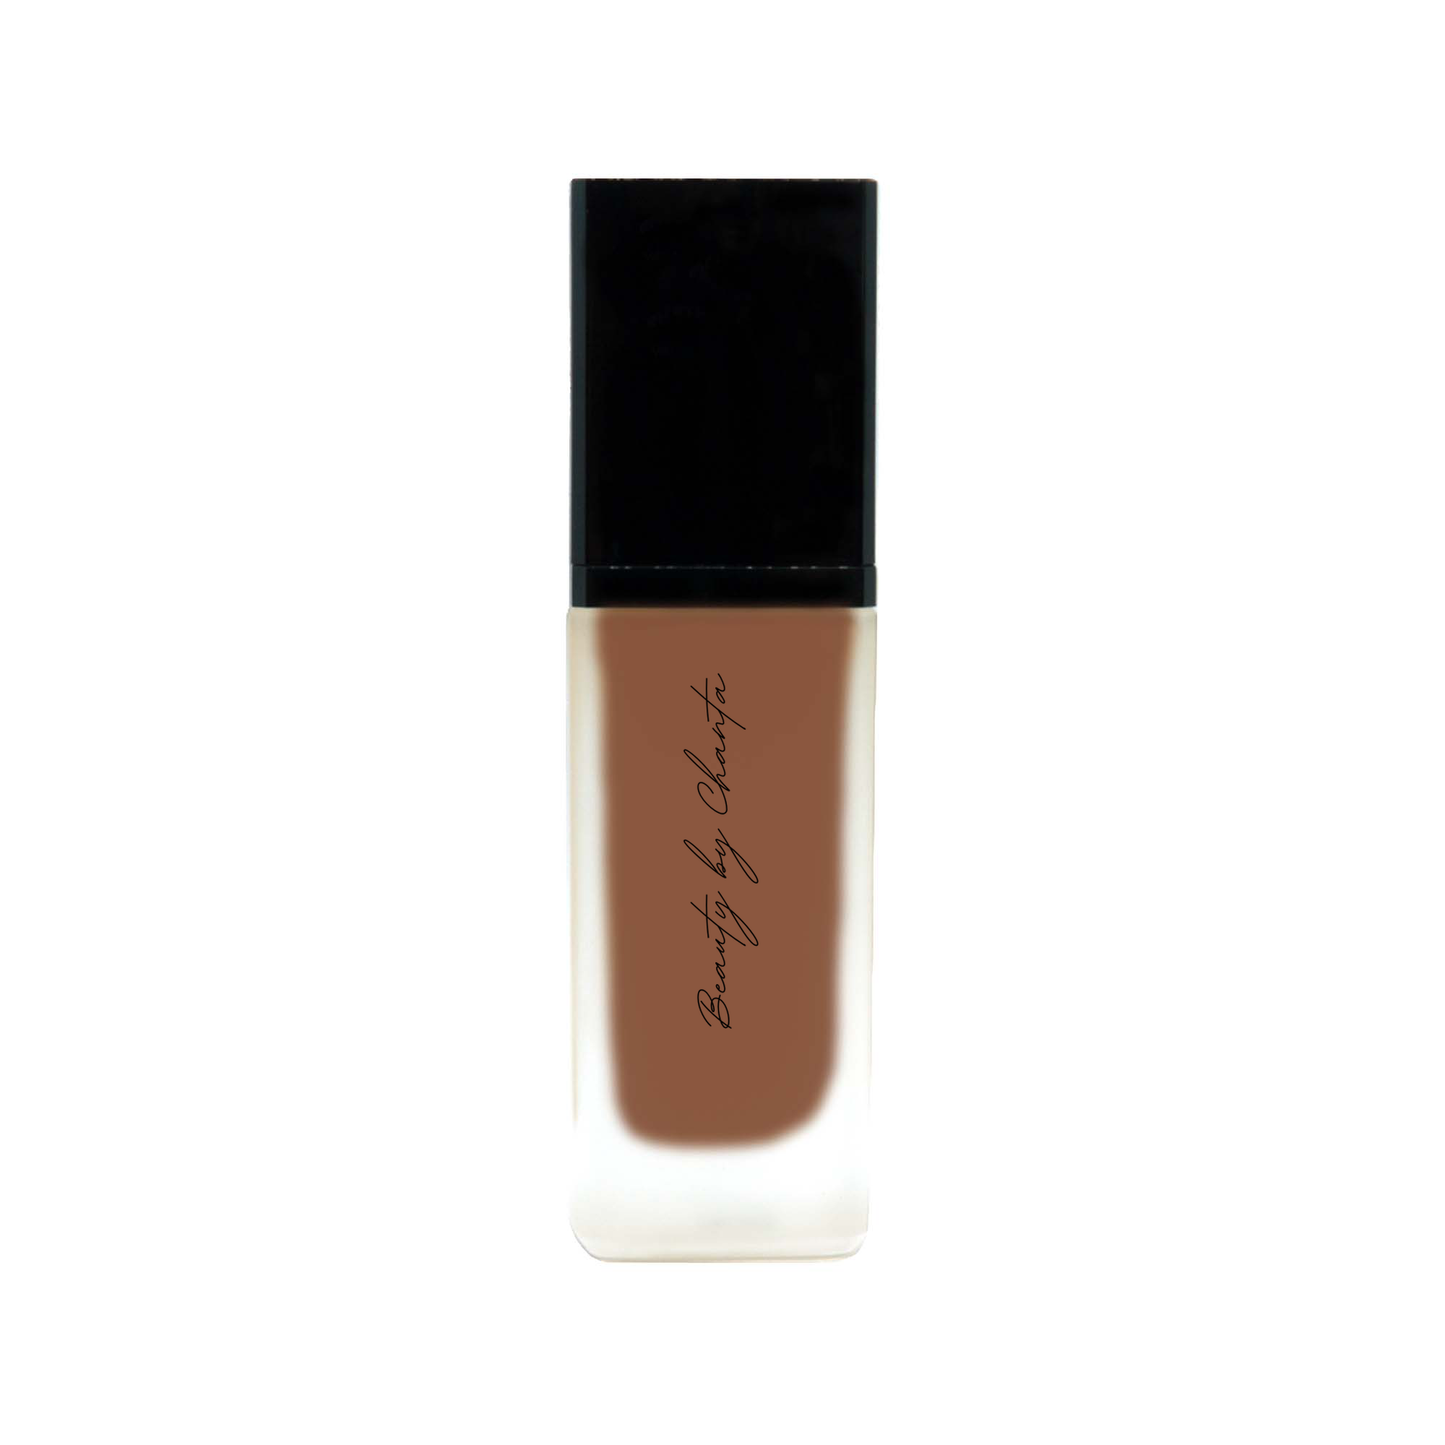 Foundation with SPF - Amber